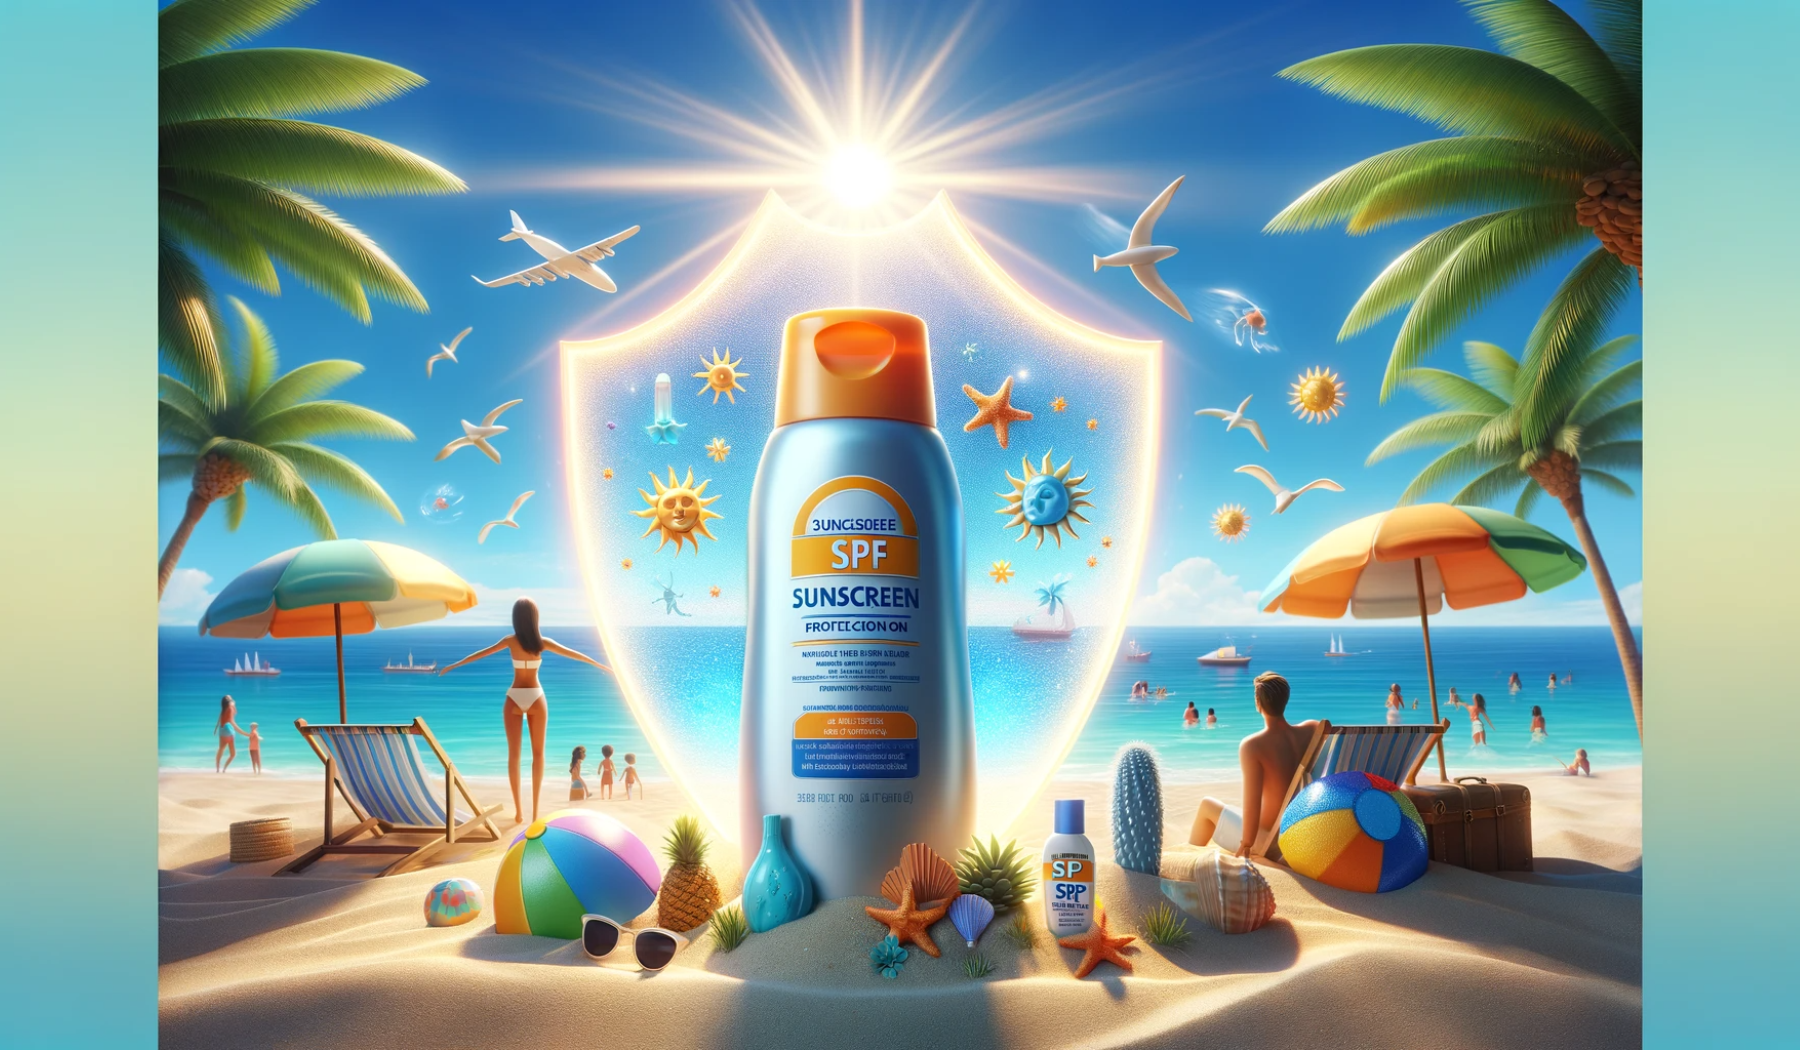 Sunscreen Protection: Shielding Your Skin from the Sun's Rays